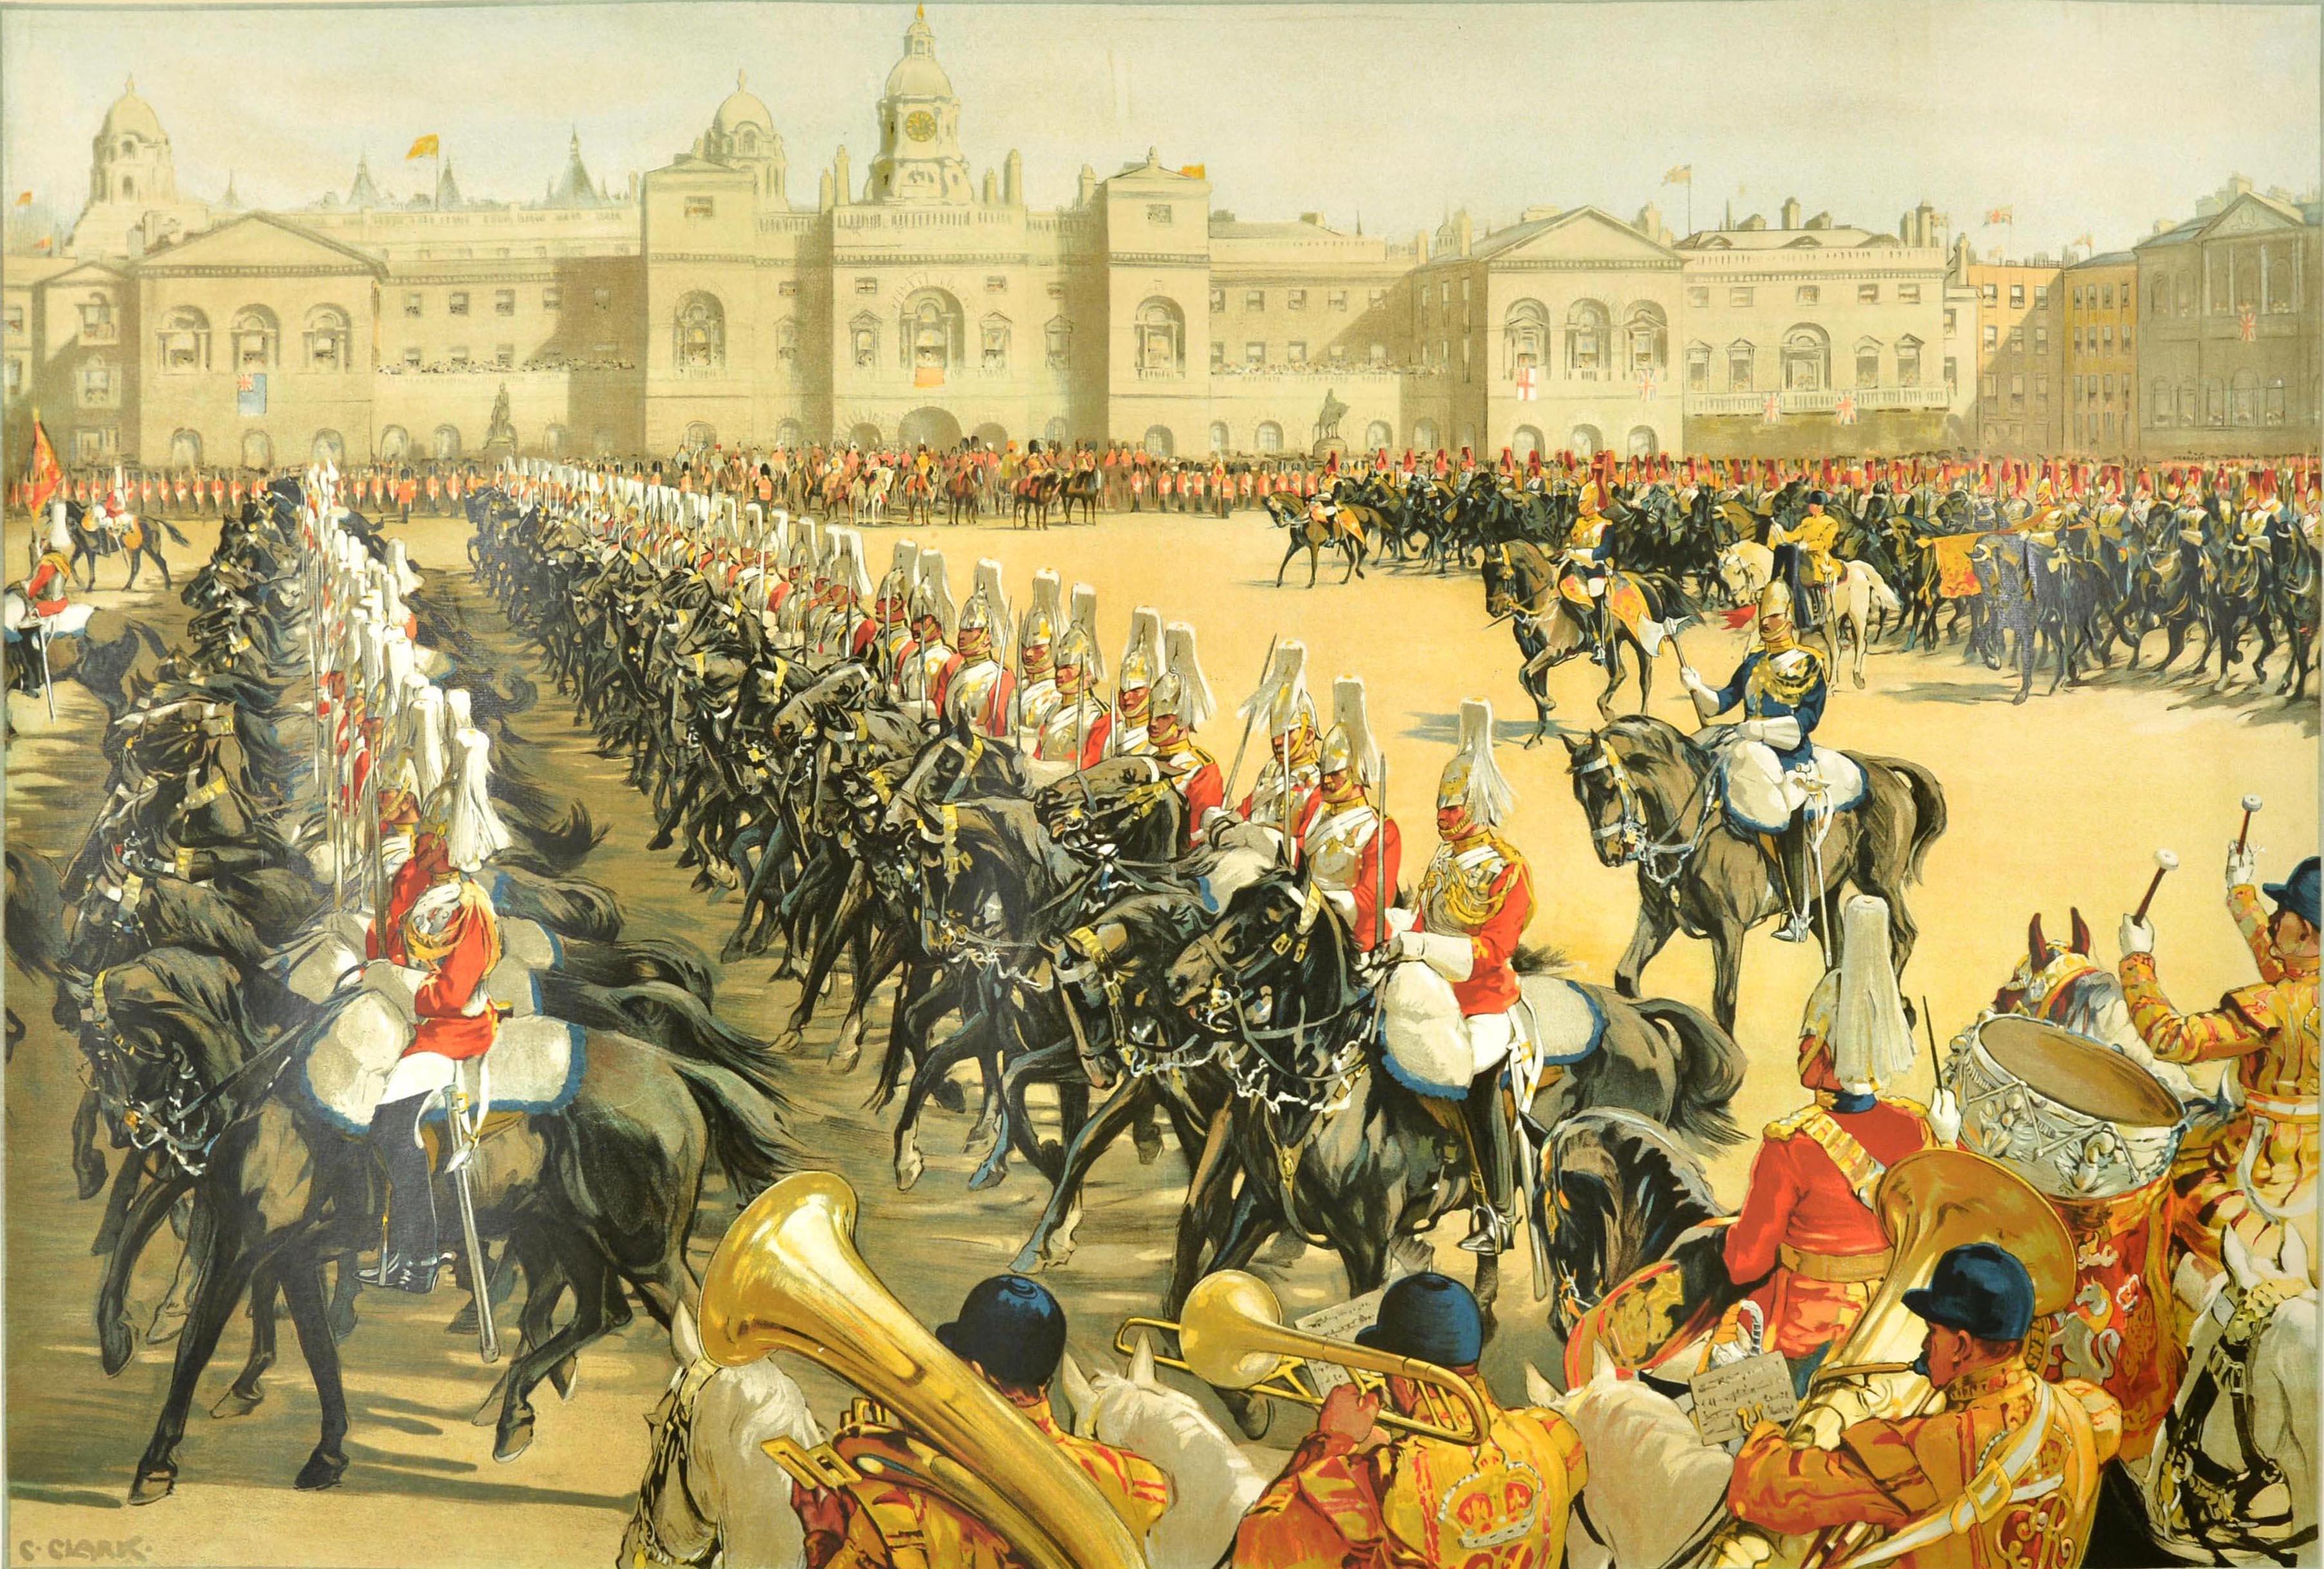 Original vintage poster issued by LMS London Midland Scottish railway featuring artwork by the painter and poster artist Christopher Clark (1875-1942) with the title - London by LMS Trooping the Colour Whitehall - below the ceremonial scene